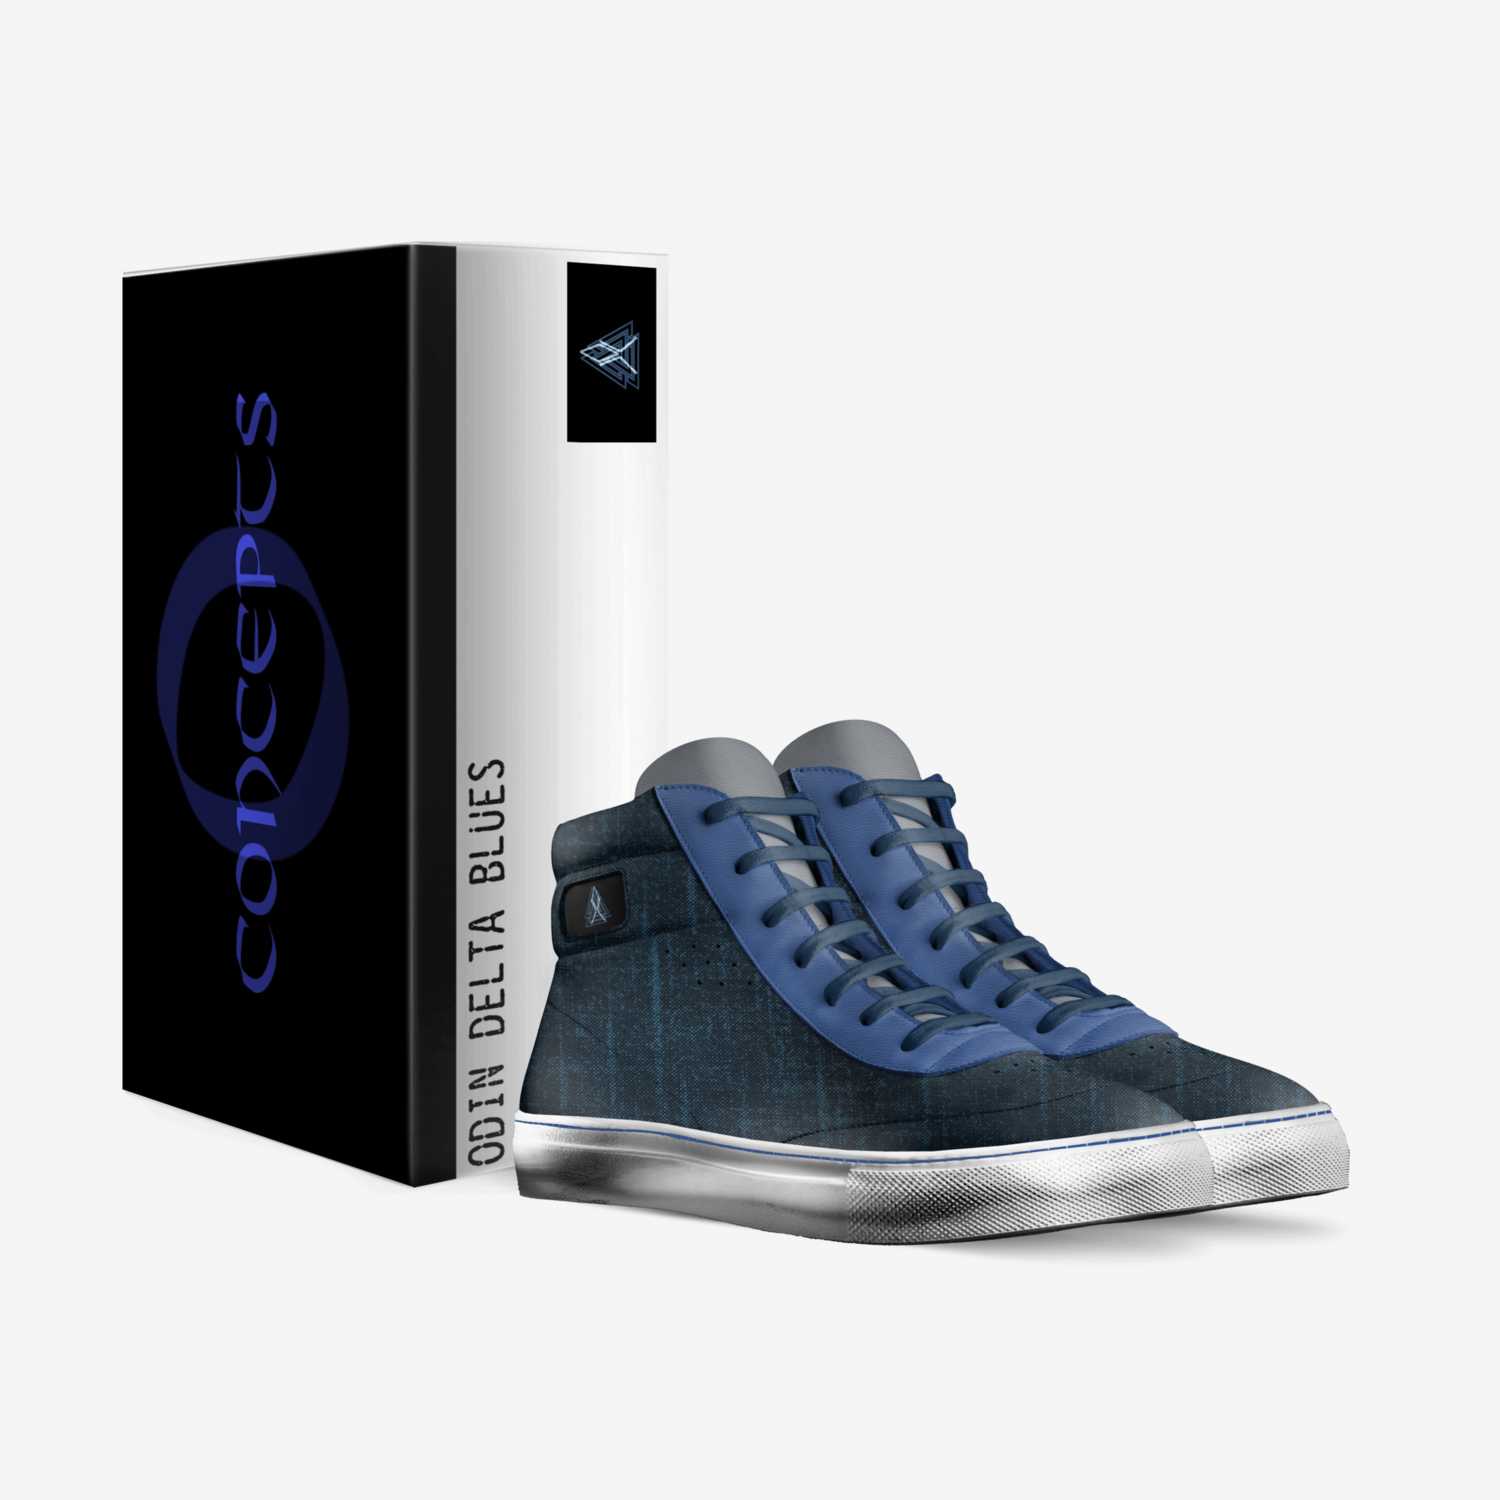 Odin Concepts custom made in Italy shoes by Brodric Cherryholmes | Box view